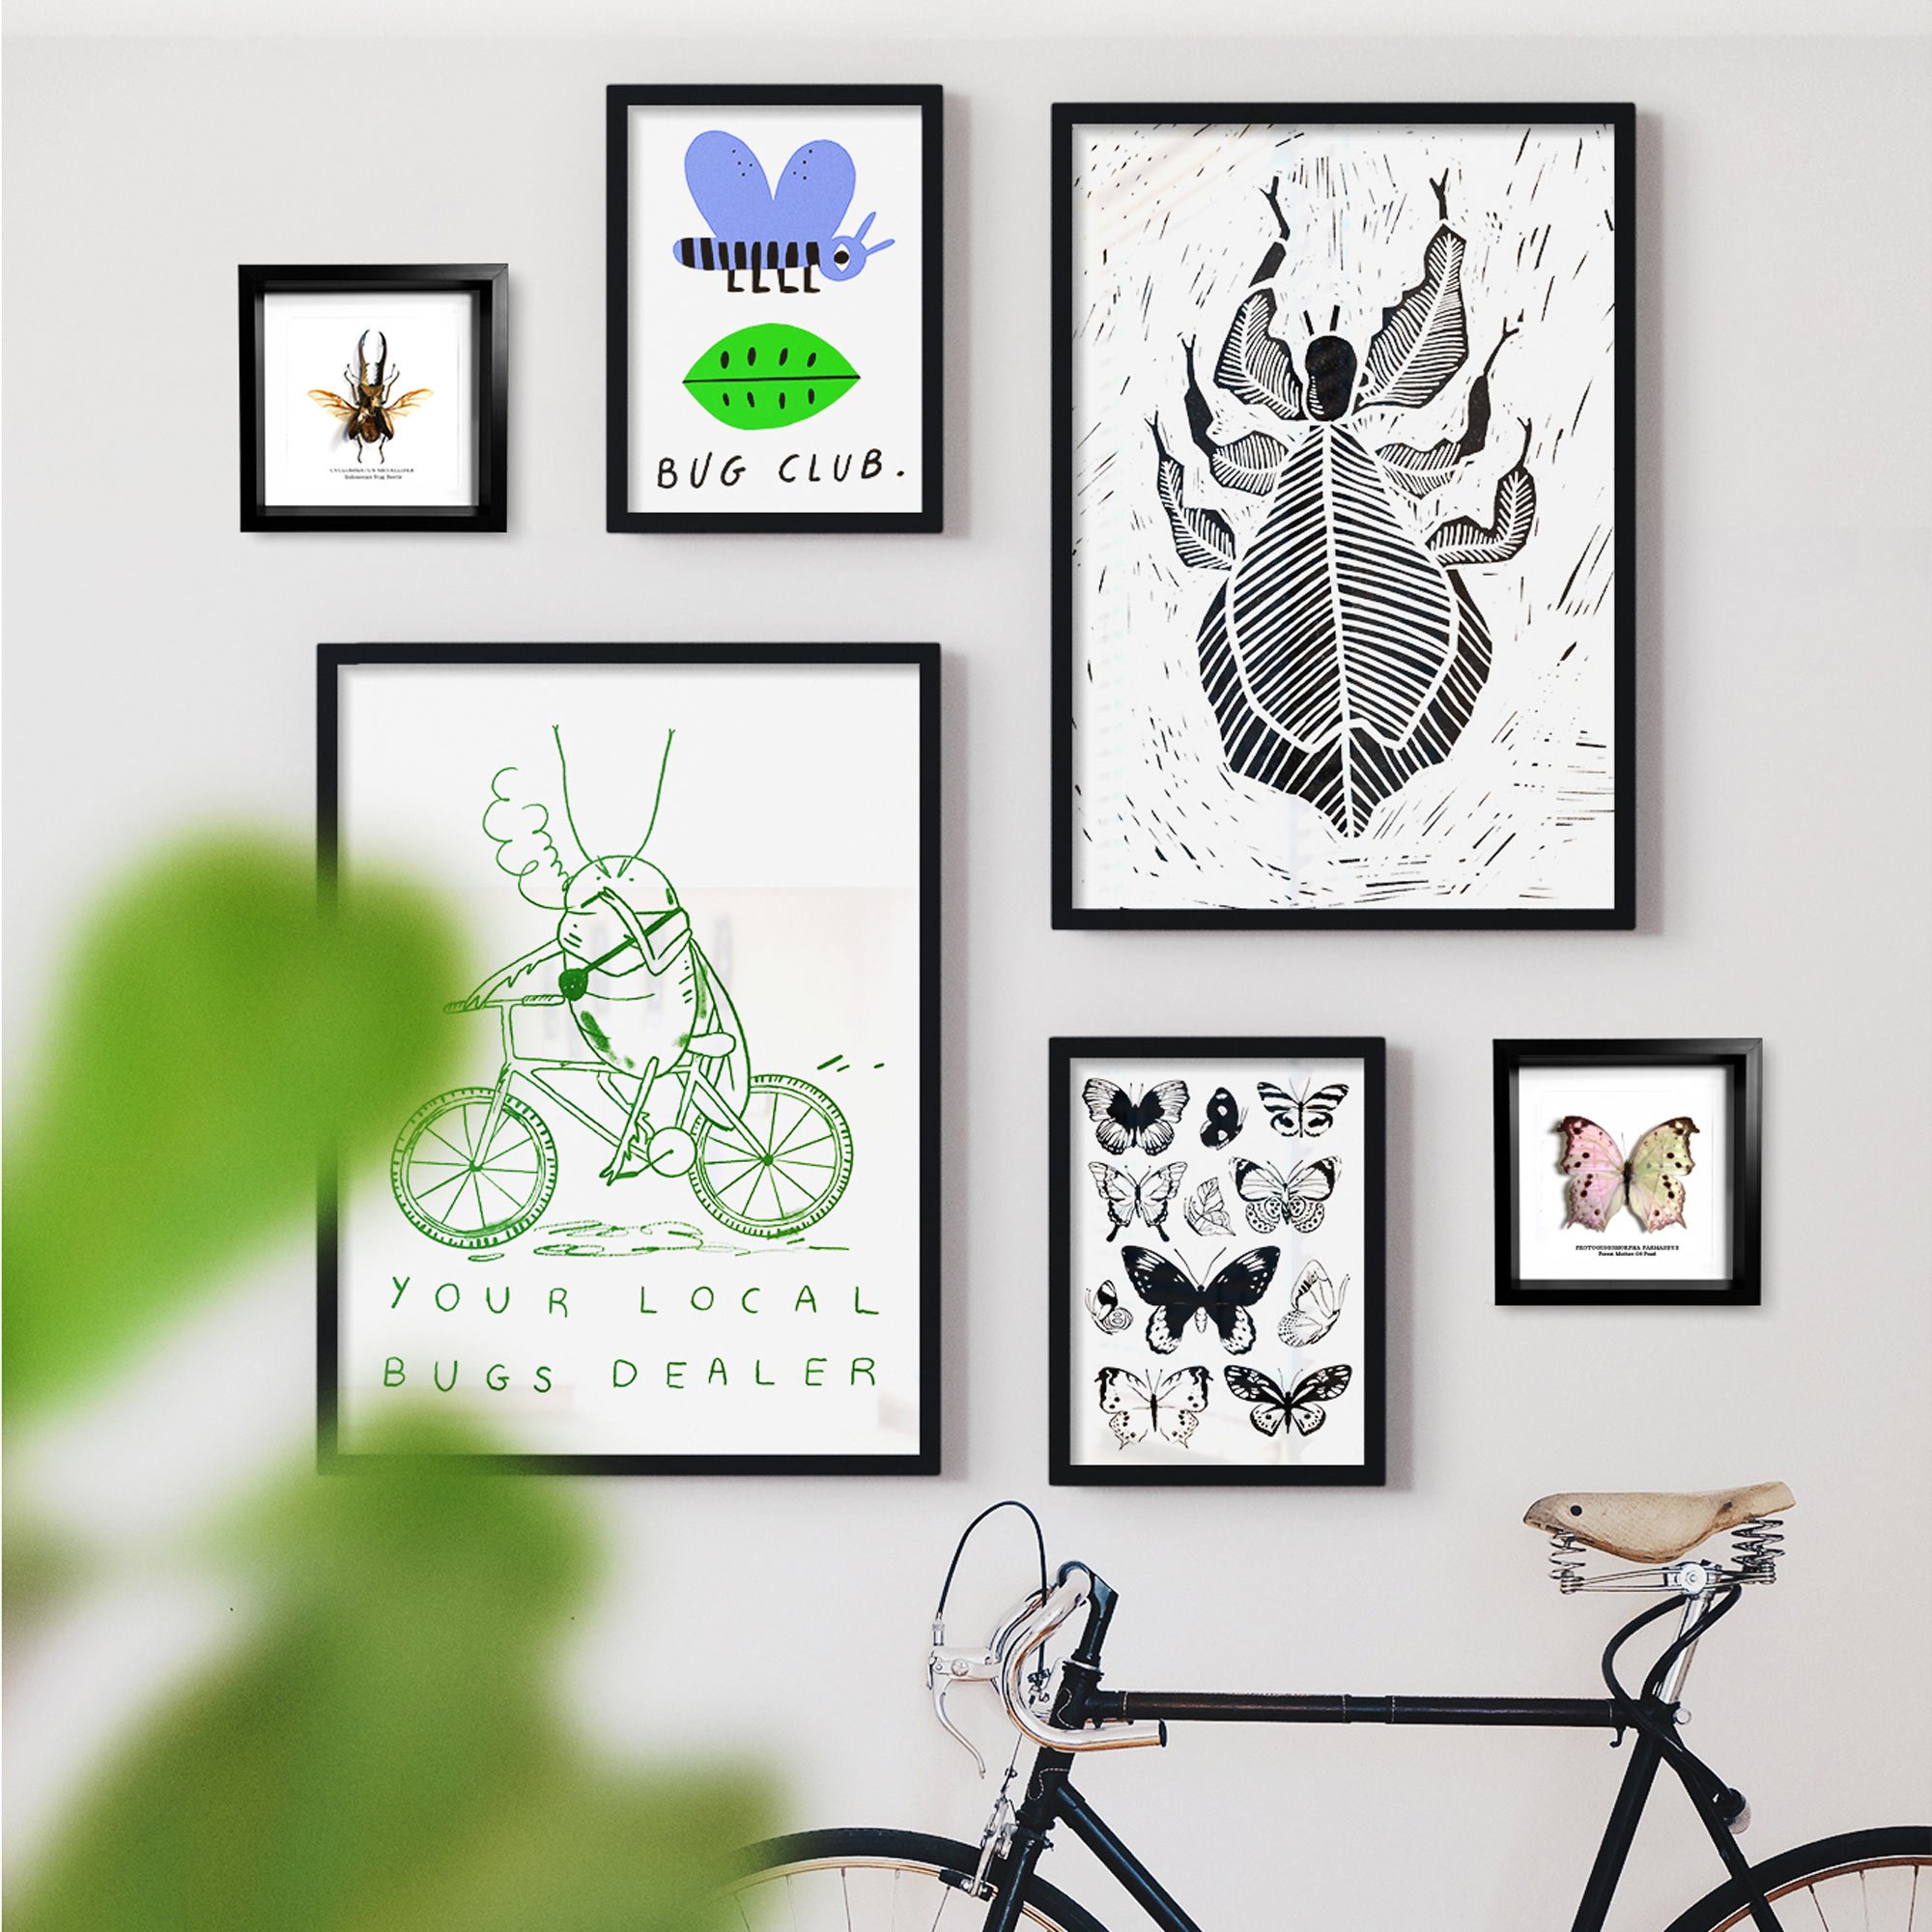 Framed Insects & Fossils For Sale | The Bug Club